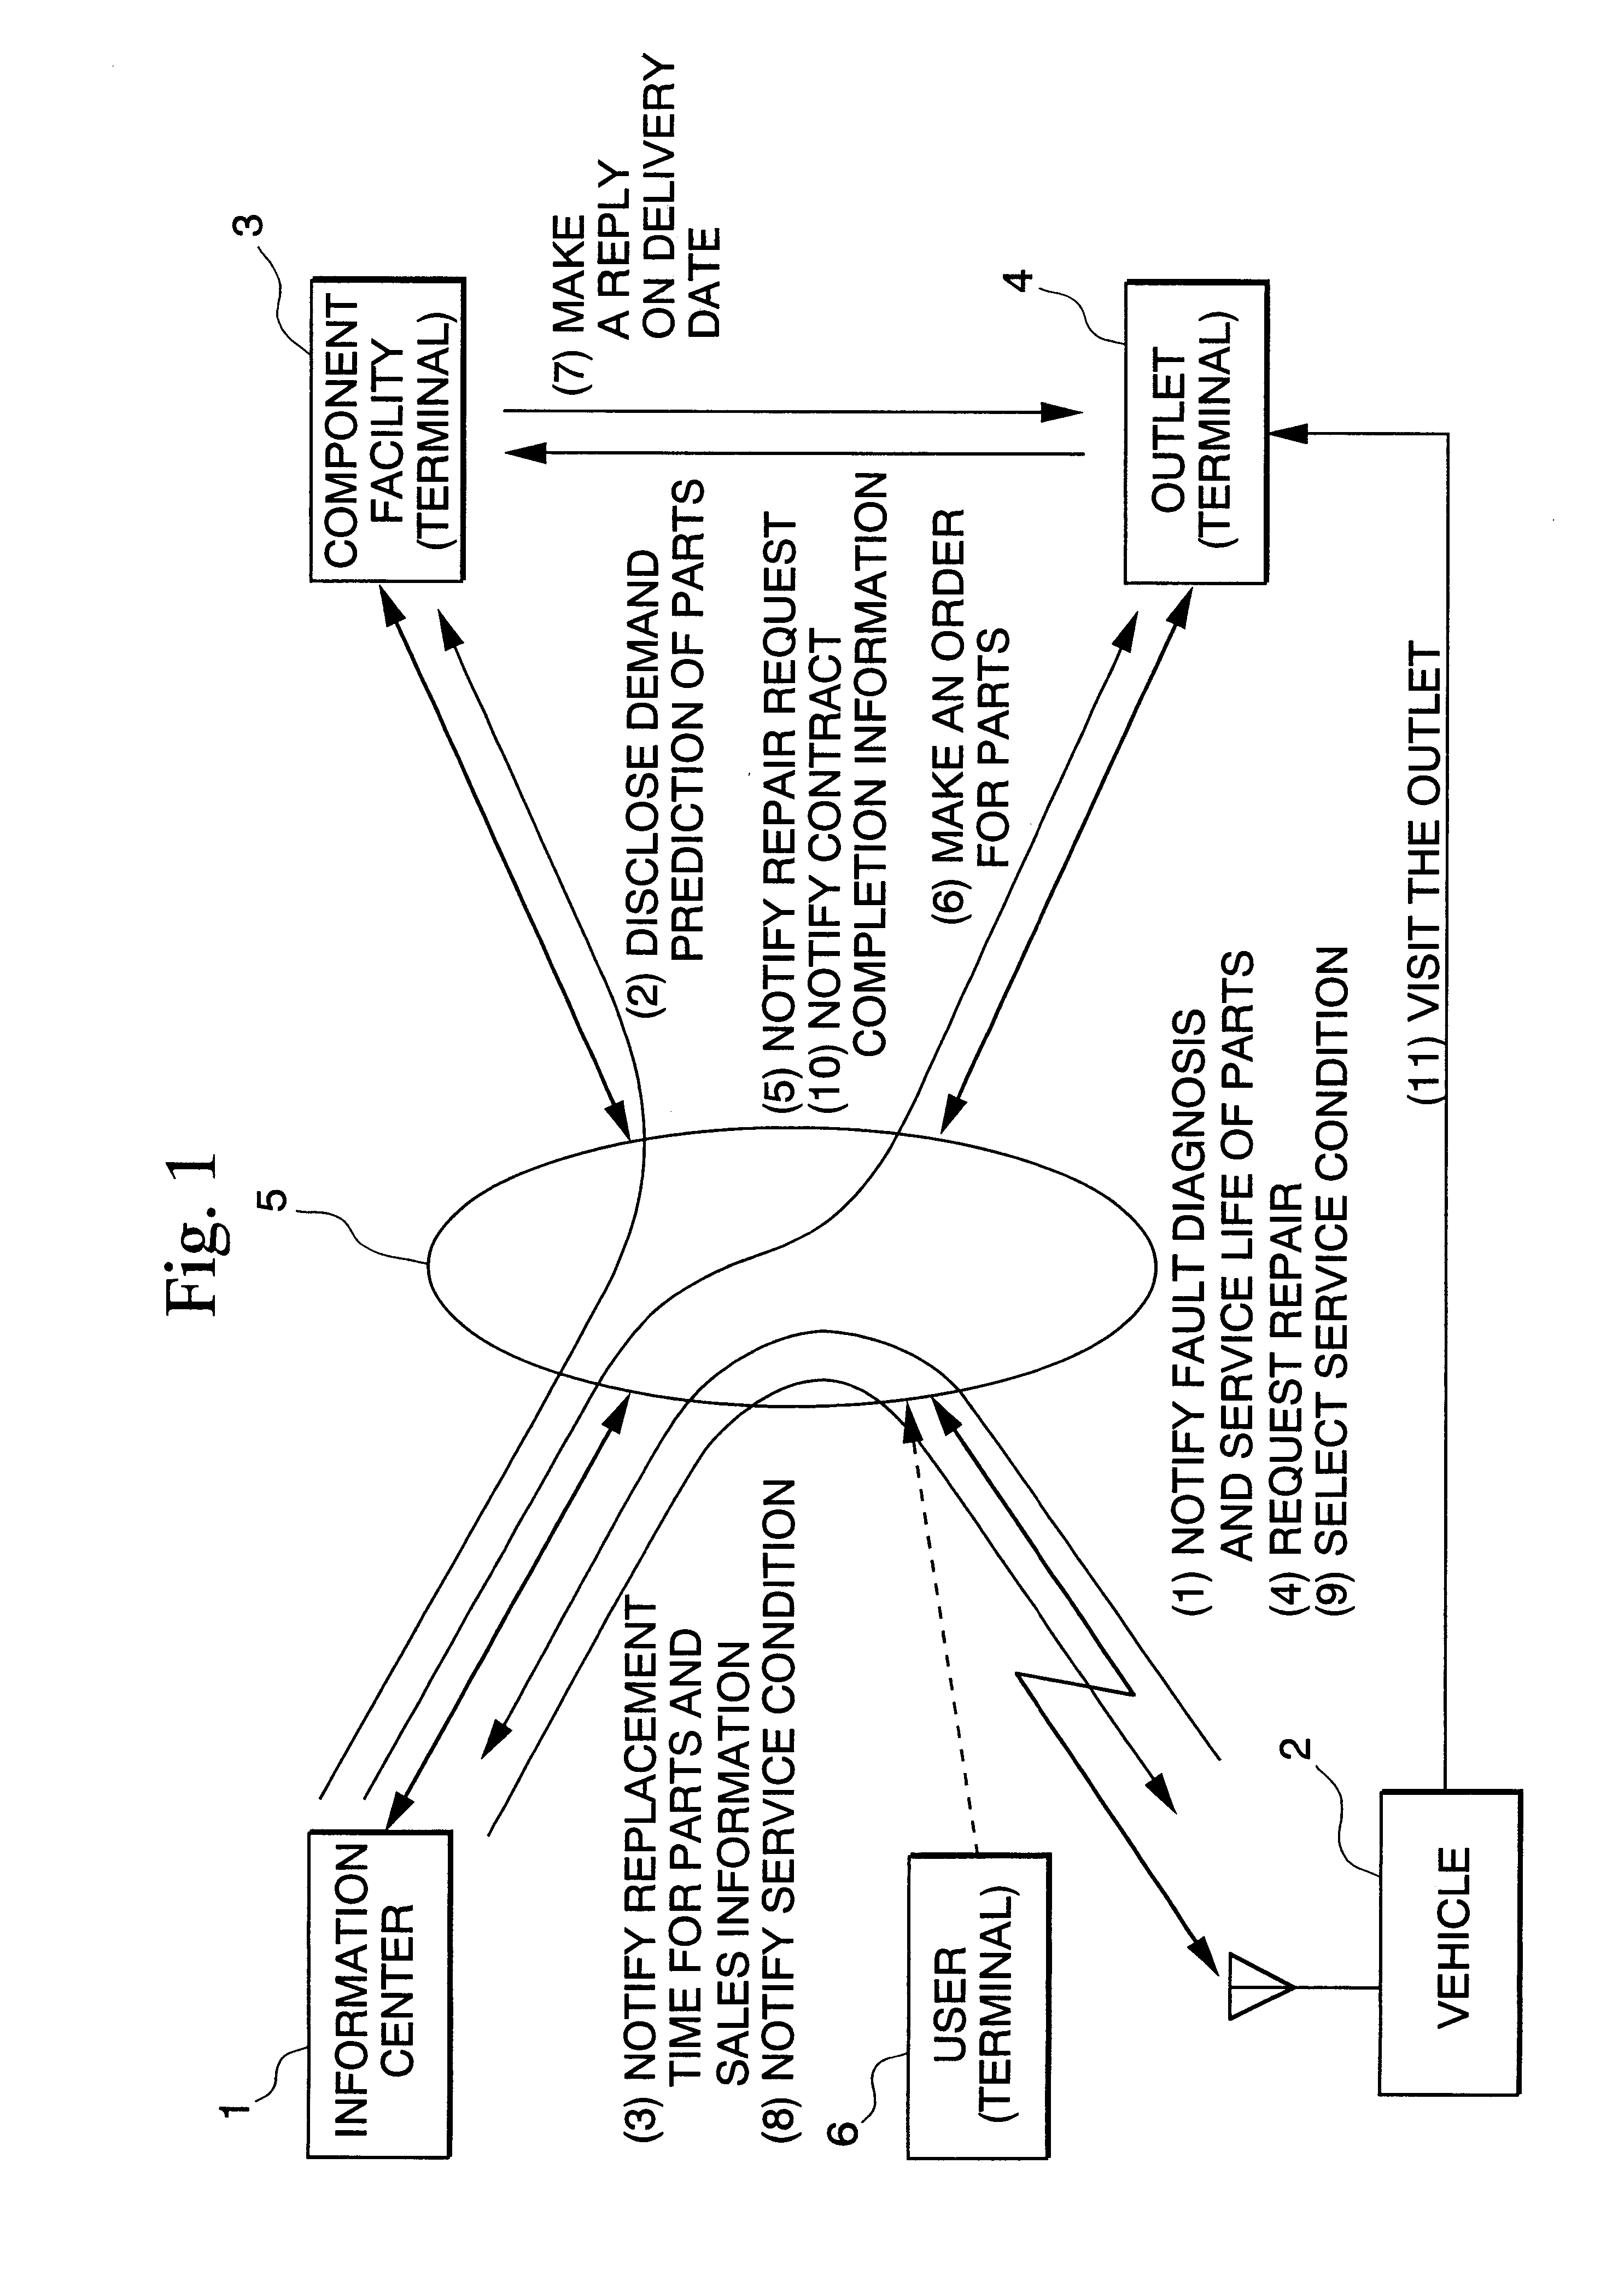 Service providing method and system